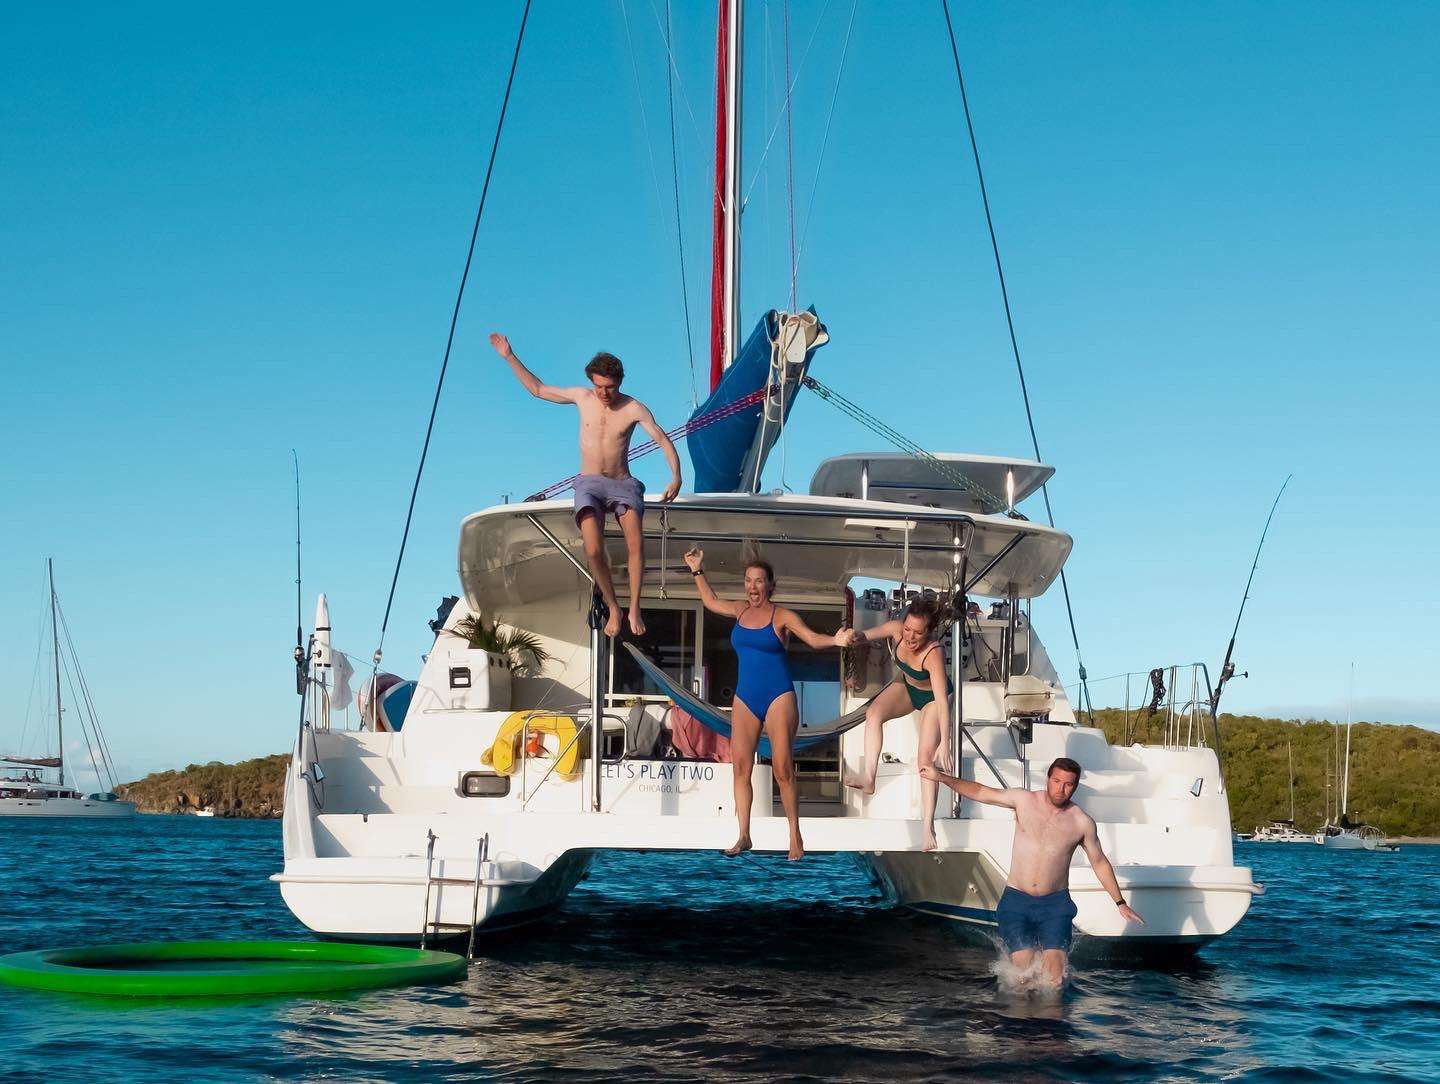 Let's Play Two Crewed Catamaran All Inclusive Charters Swim Platform